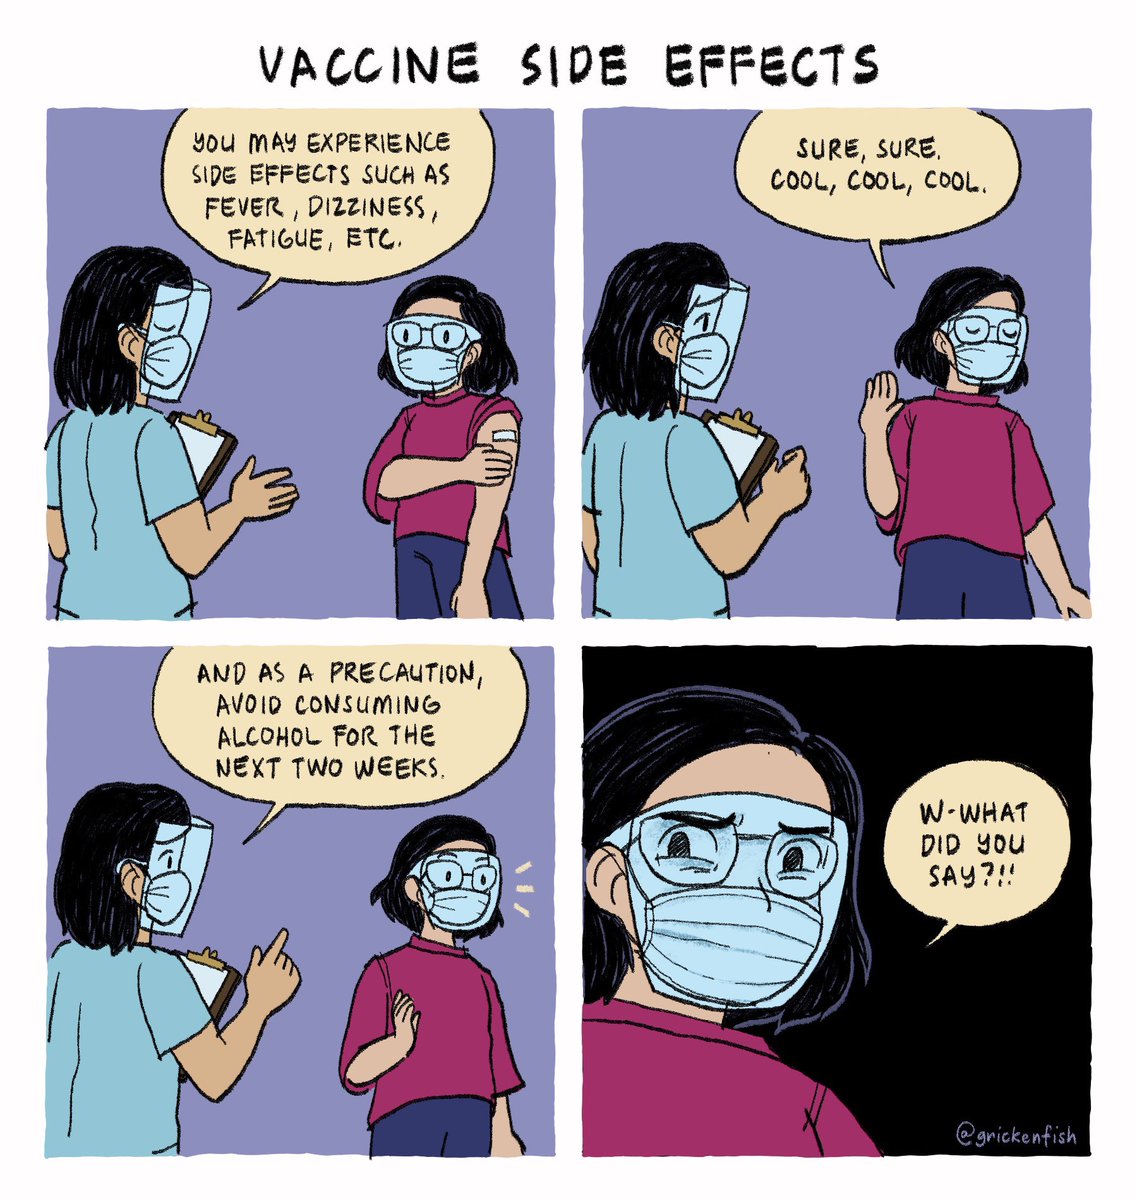 Go get vaccinated when you can, guys! 